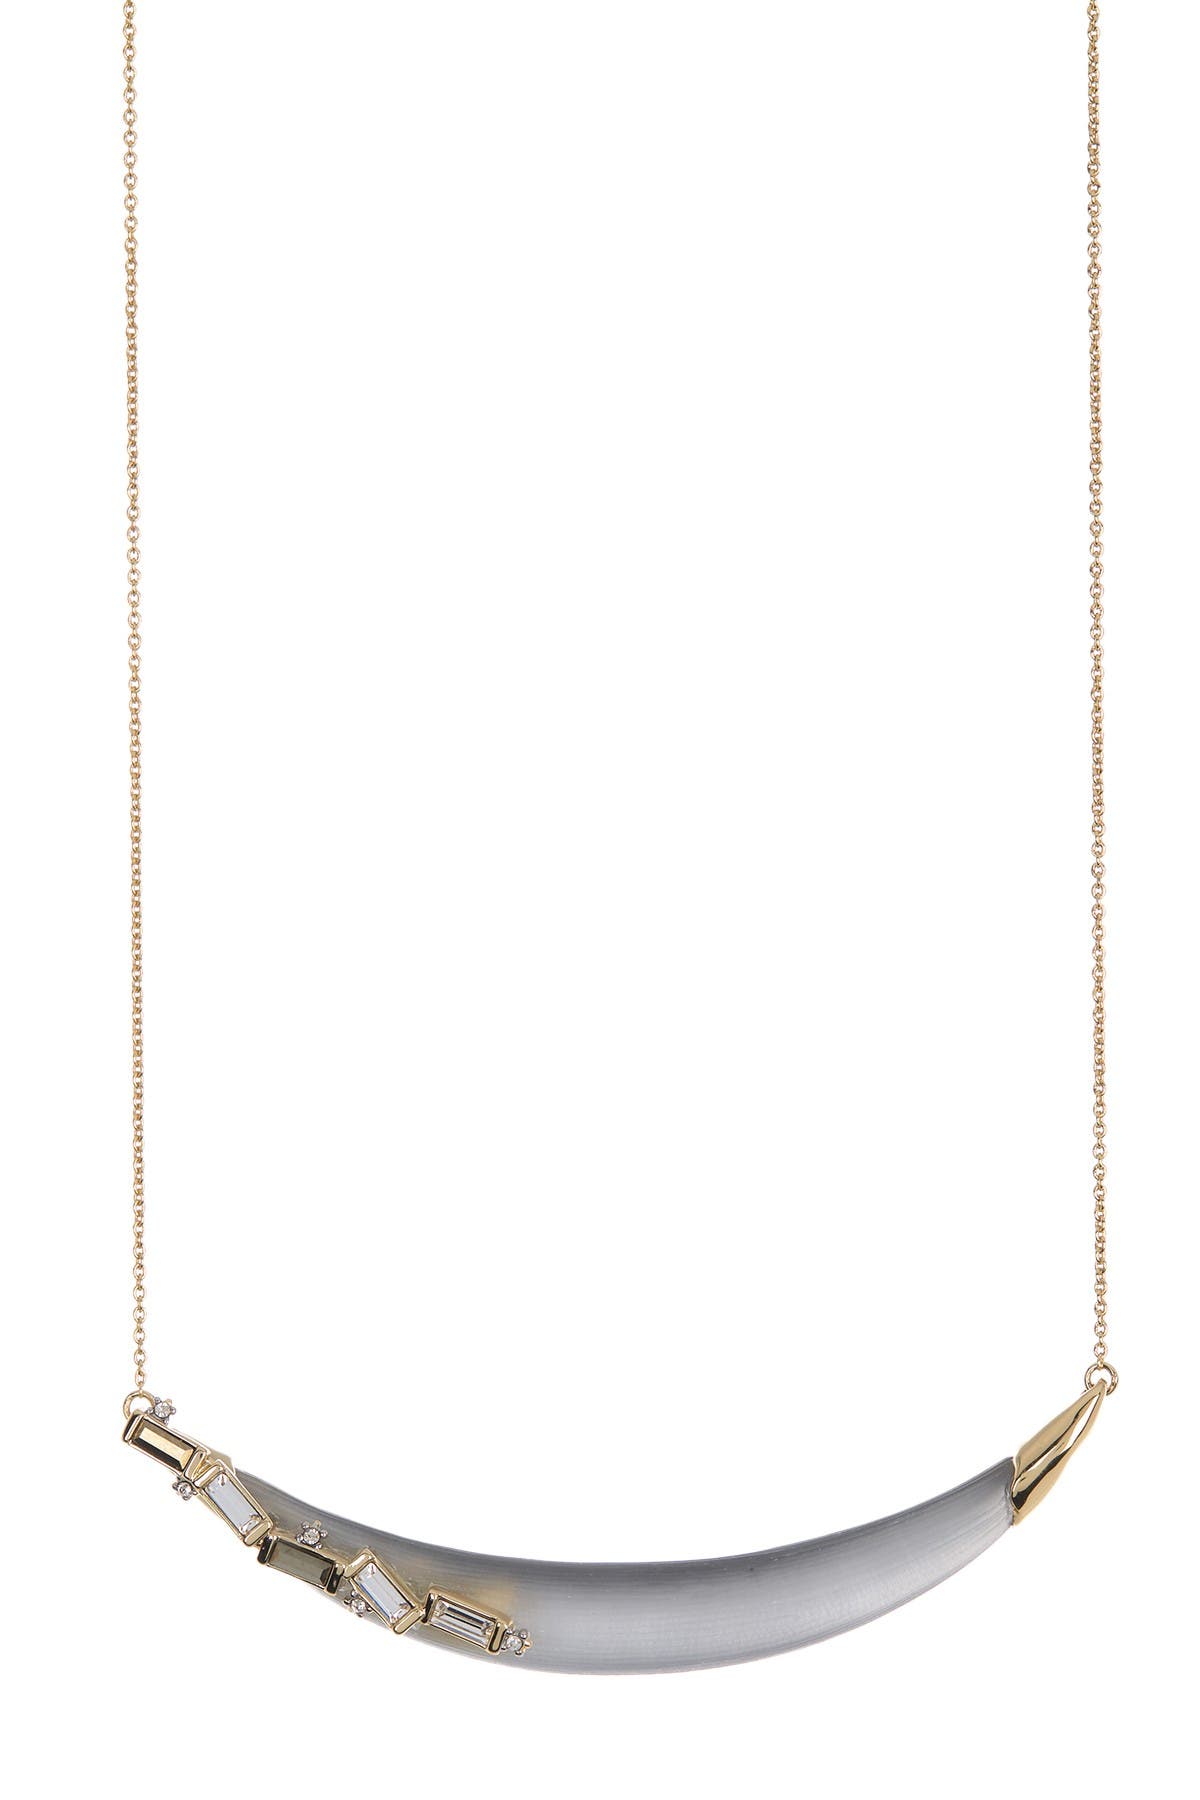 Alexis Bittar Crystal Baguette Crescent Necklace In Grey